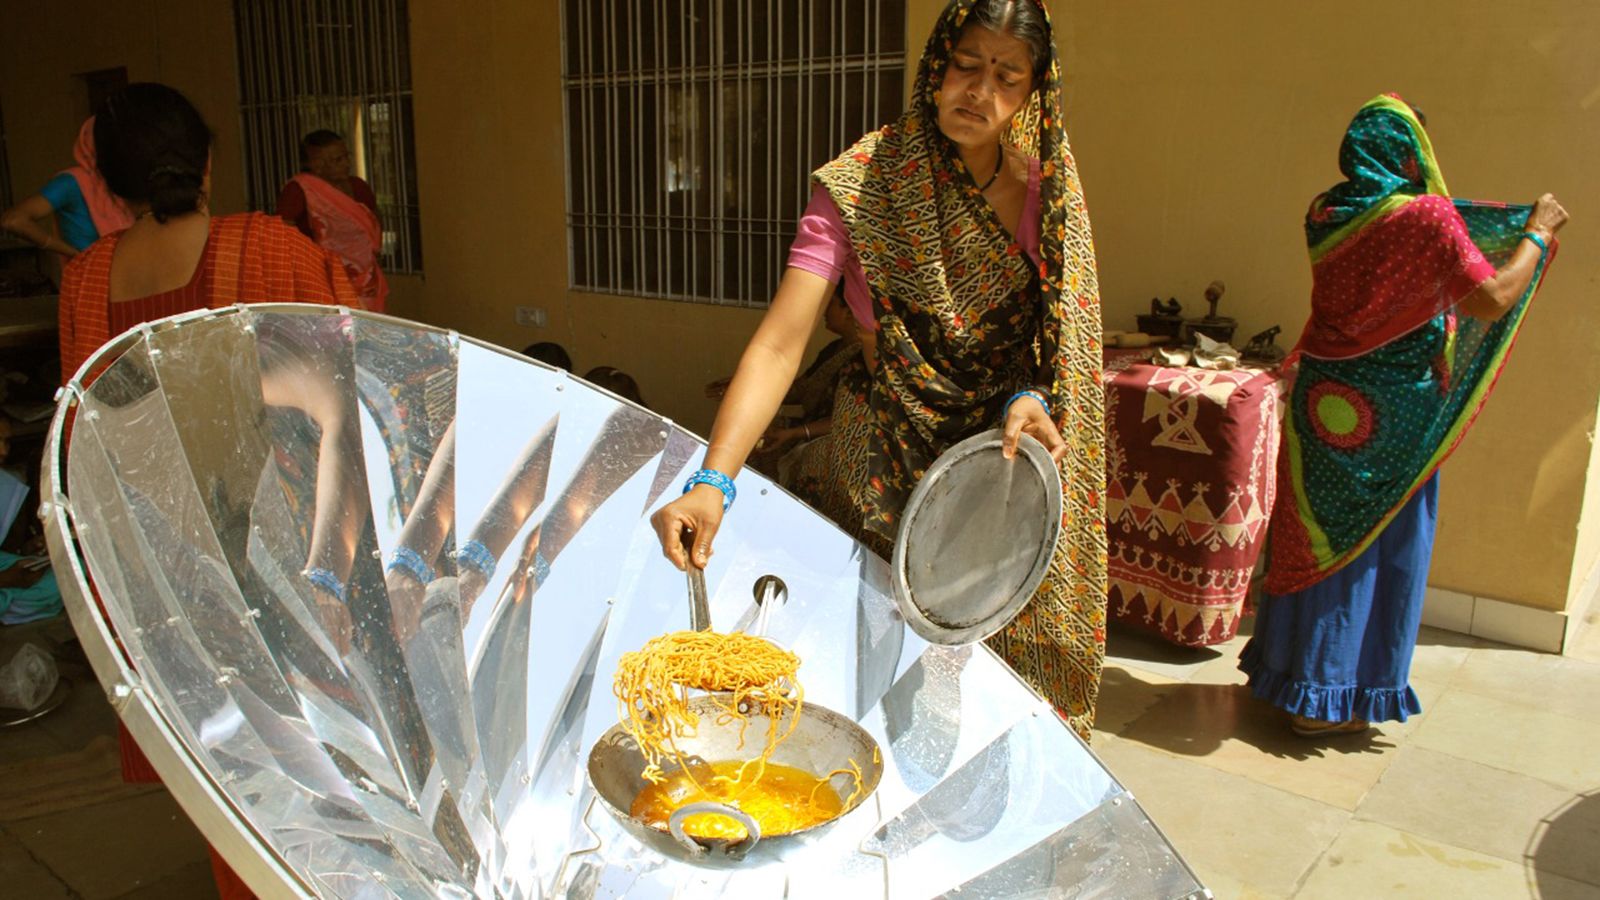 Solar cooking system enables sustainable rural cooking